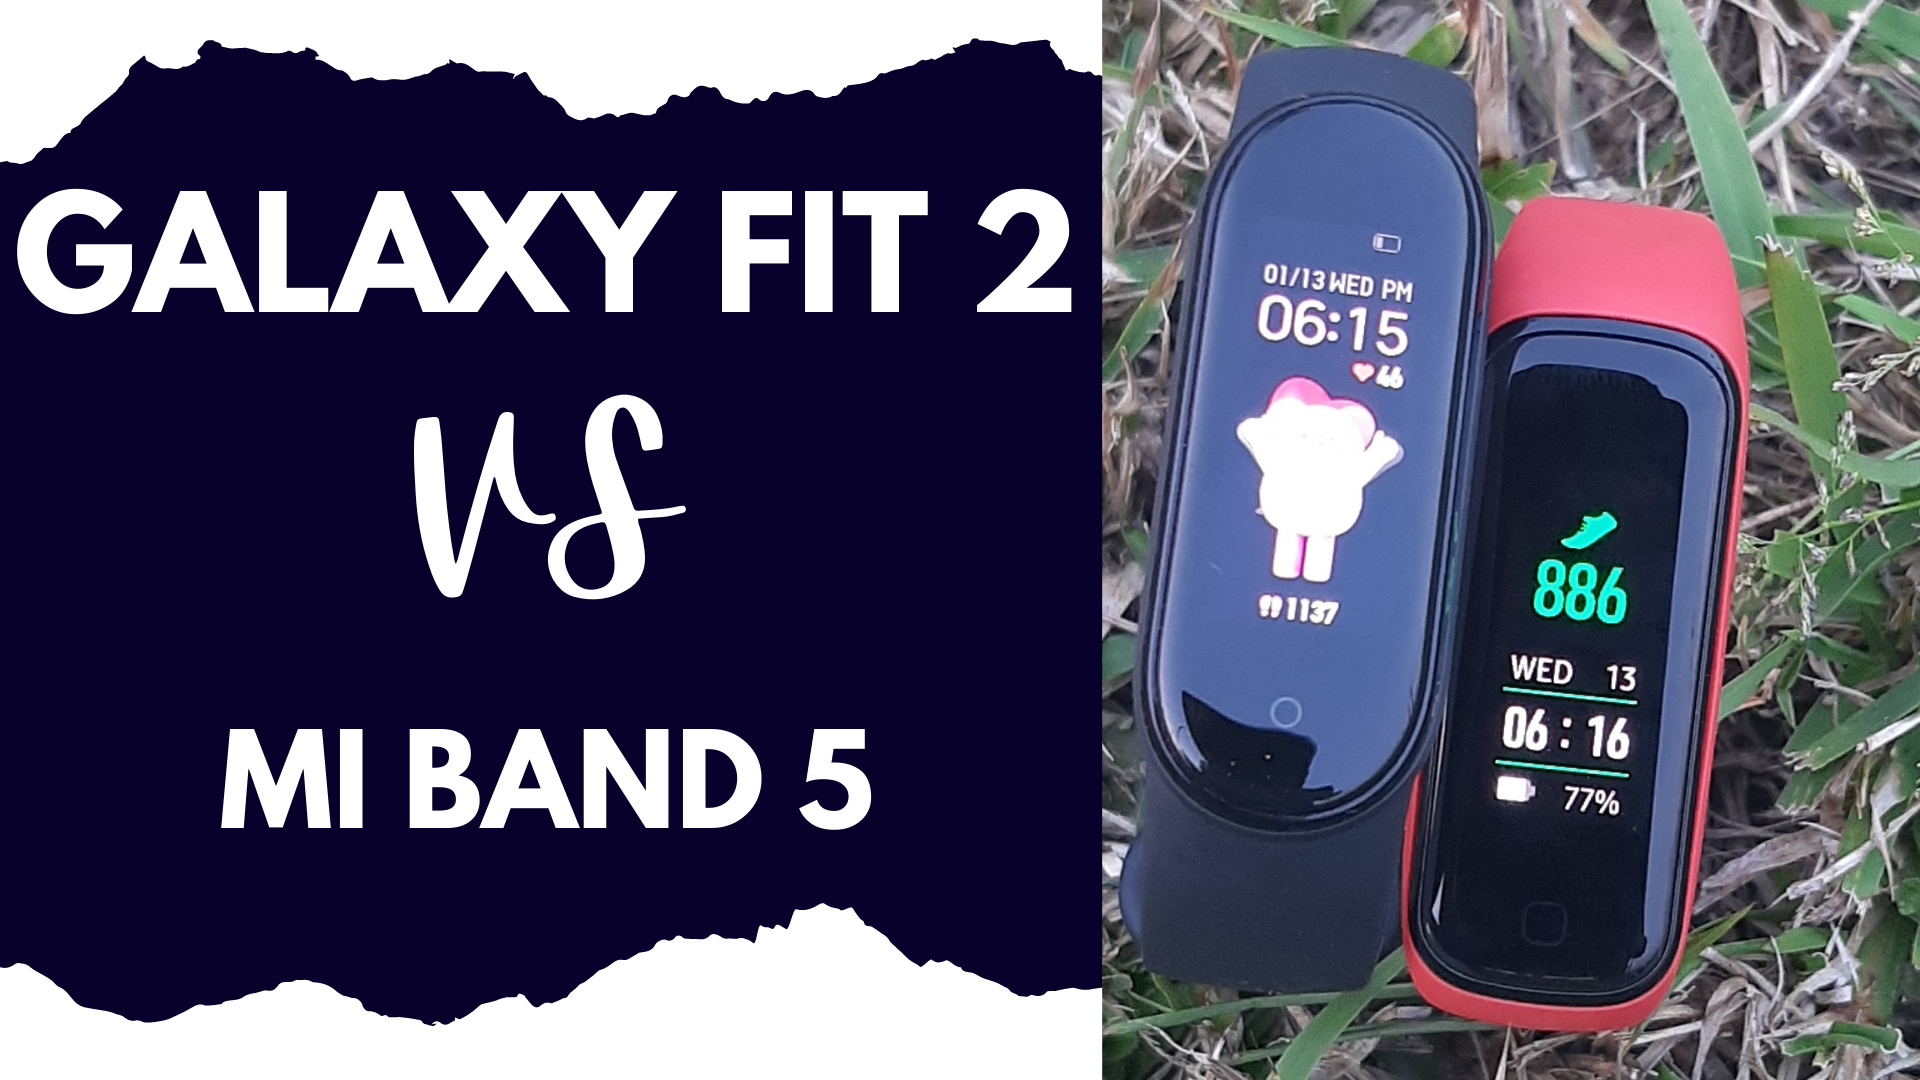 Samsung Galaxy Fit 2 vs Mi Band 5 - Which is Better?